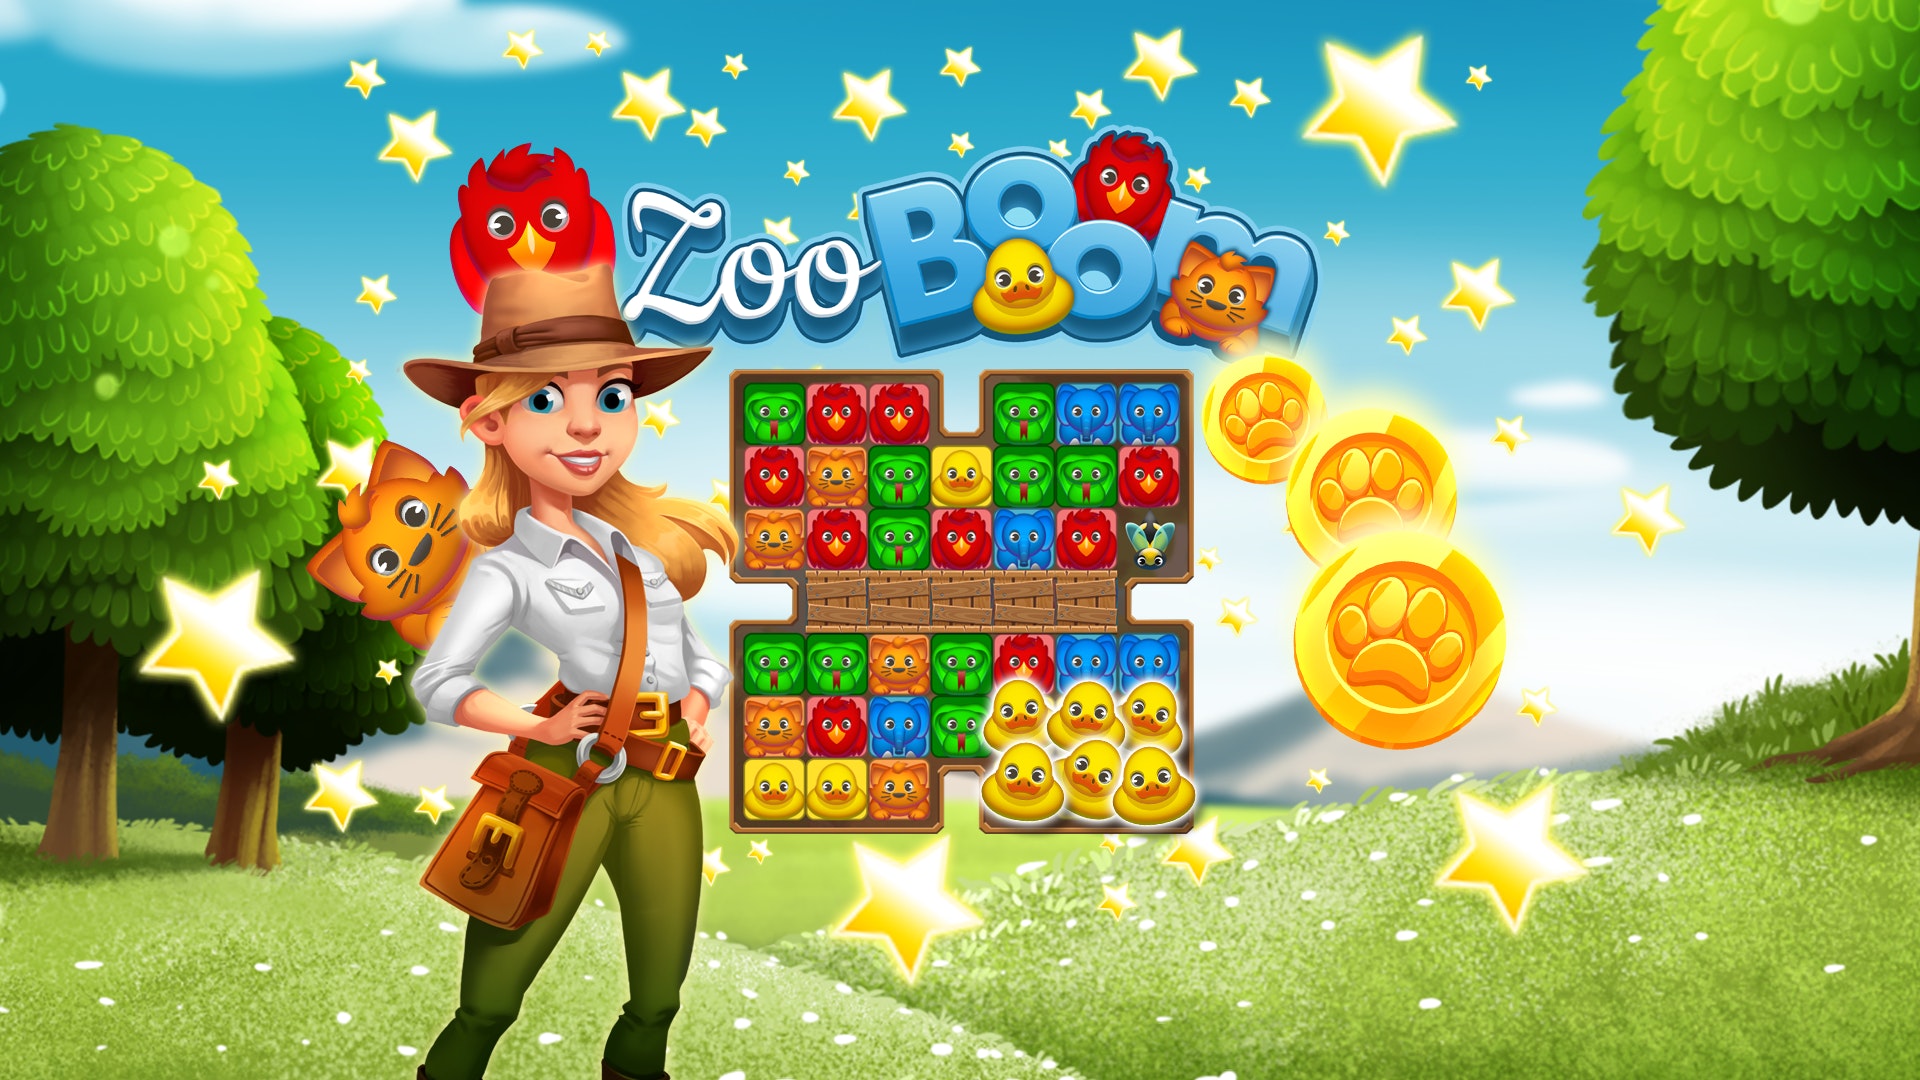 Play Free Match 3 Games Online: Play Unblocked Zuma and Candy